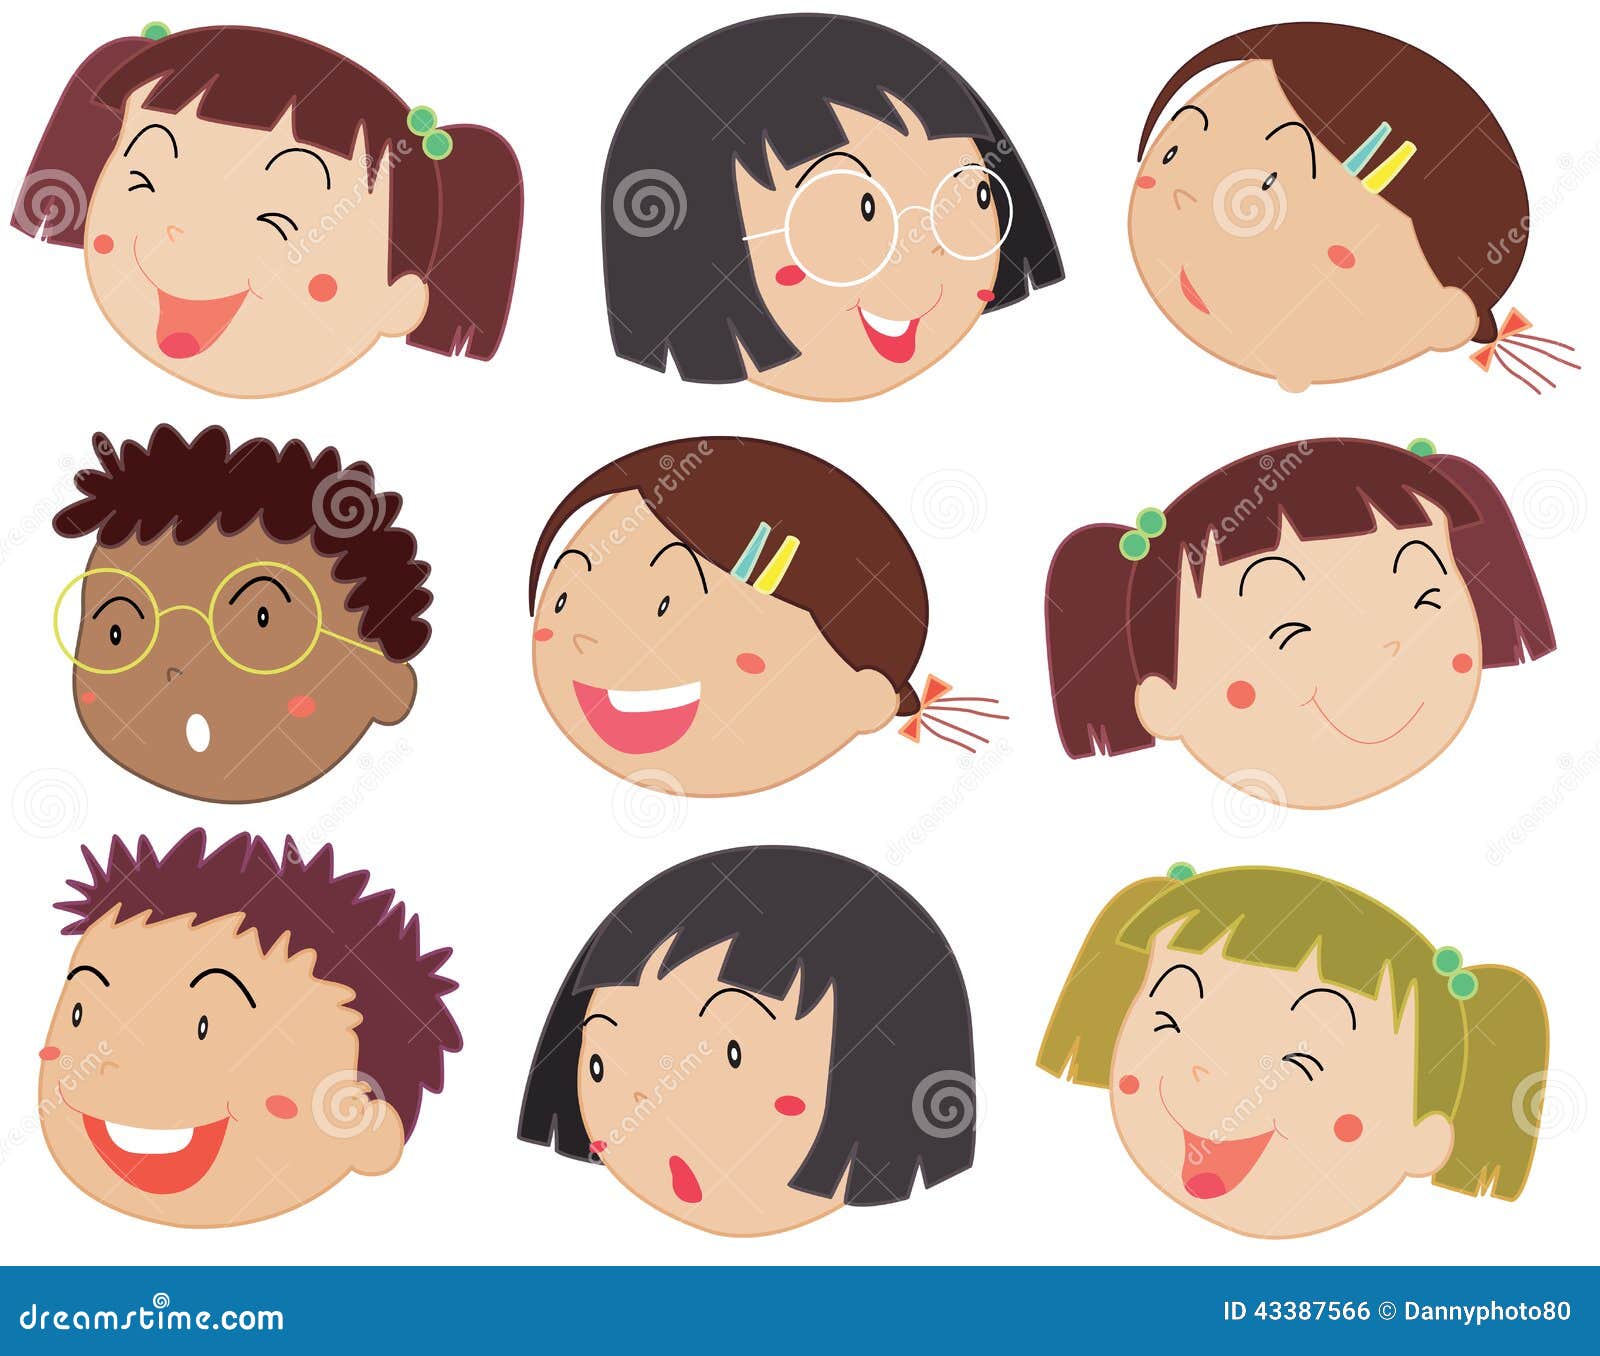 clipart happy faces expressions - photo #8